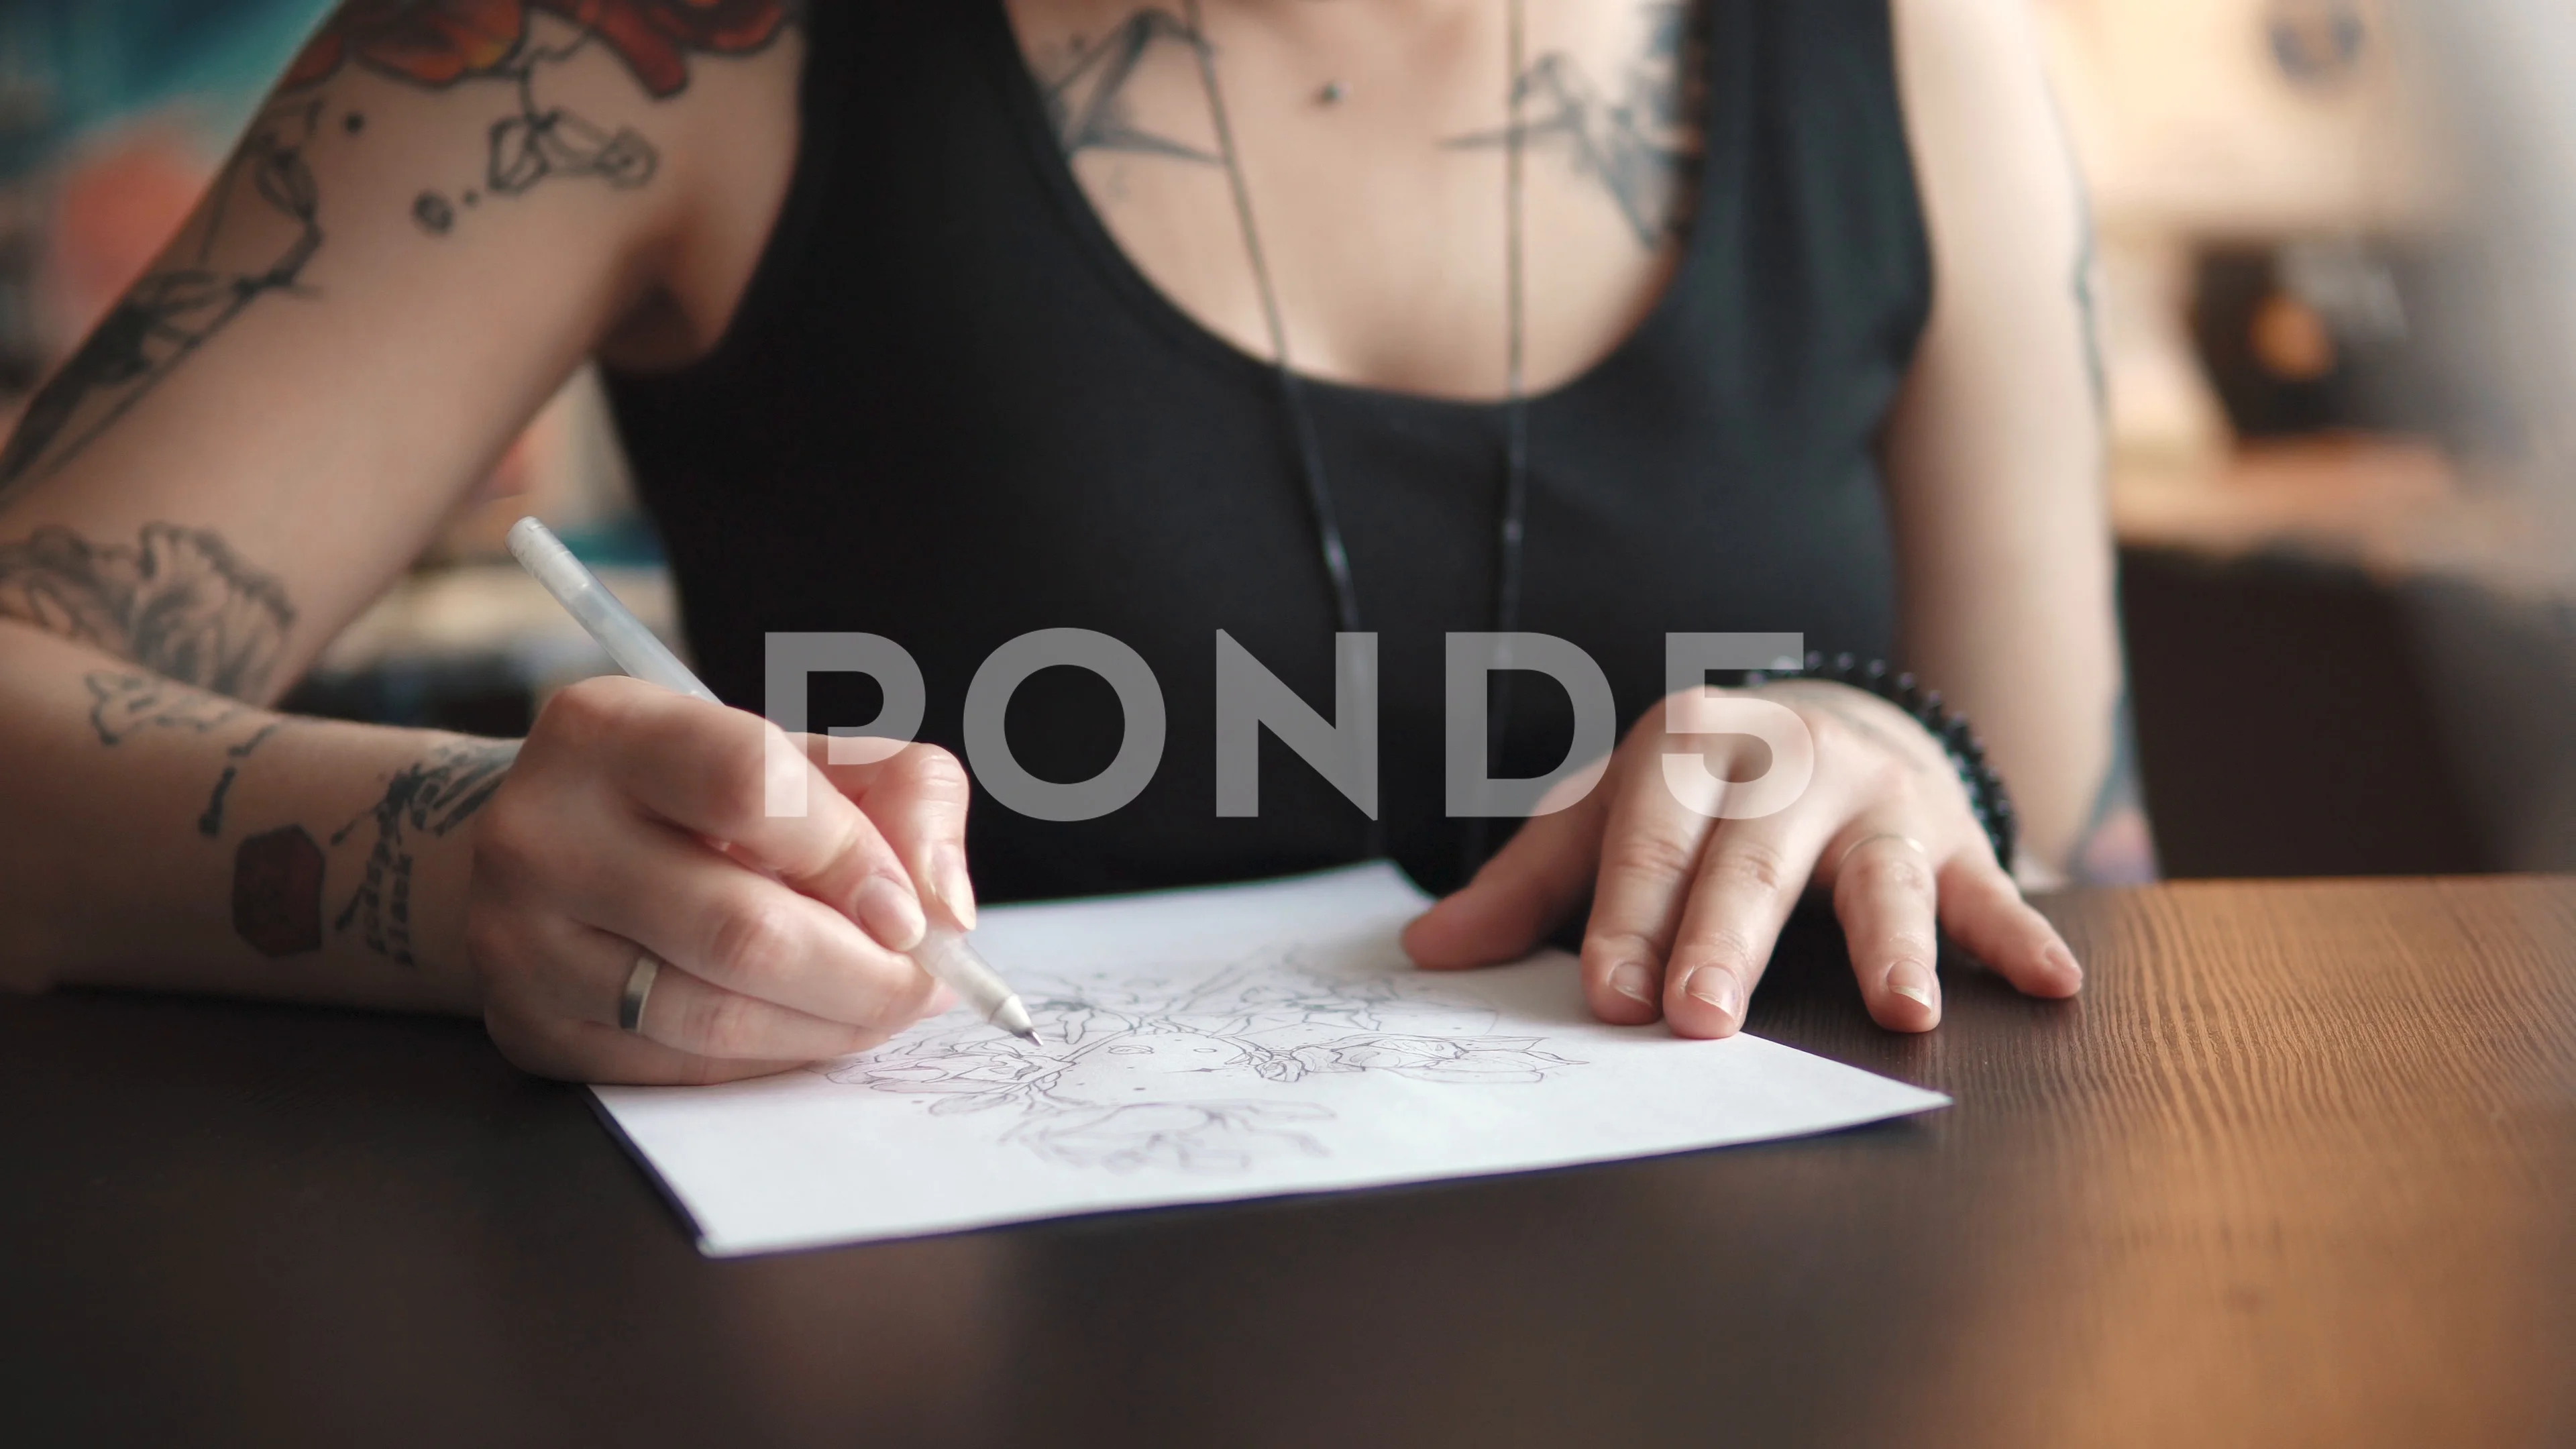 Young Tattoo Artist Drawing Sketch Inside Ink Studio - Hipster Tattoer at  Work - Contemporary Skin Trends Generation - - Focus on Stock Photo - Image  of graphic, culture: 171071370